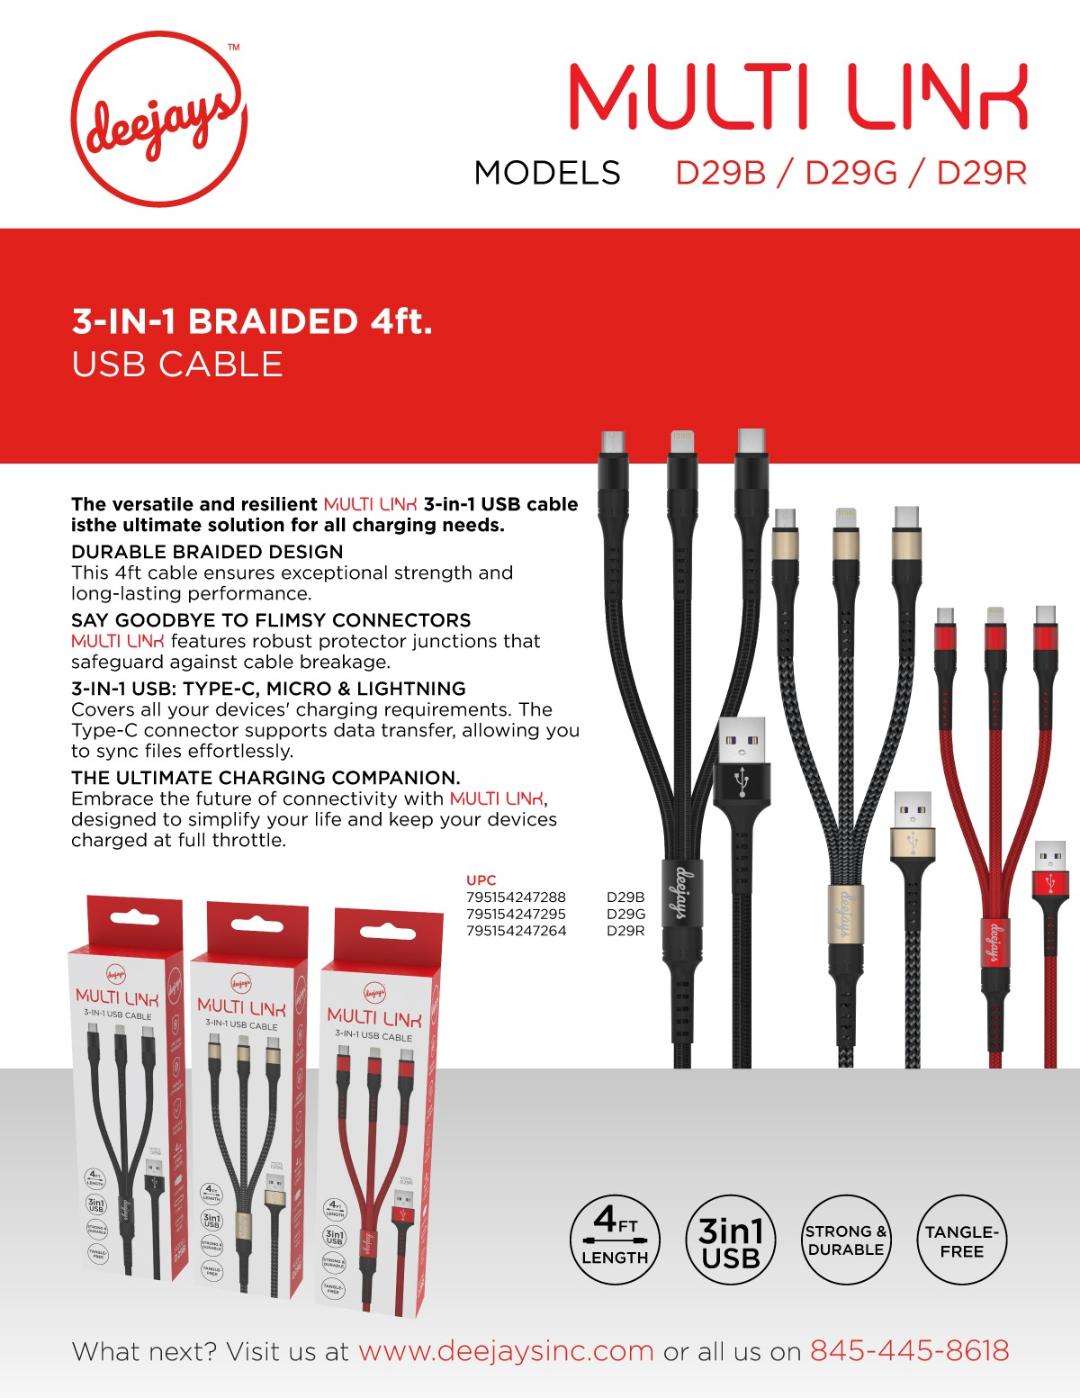 D29 Multi Link 3-in-1 Usb Cable